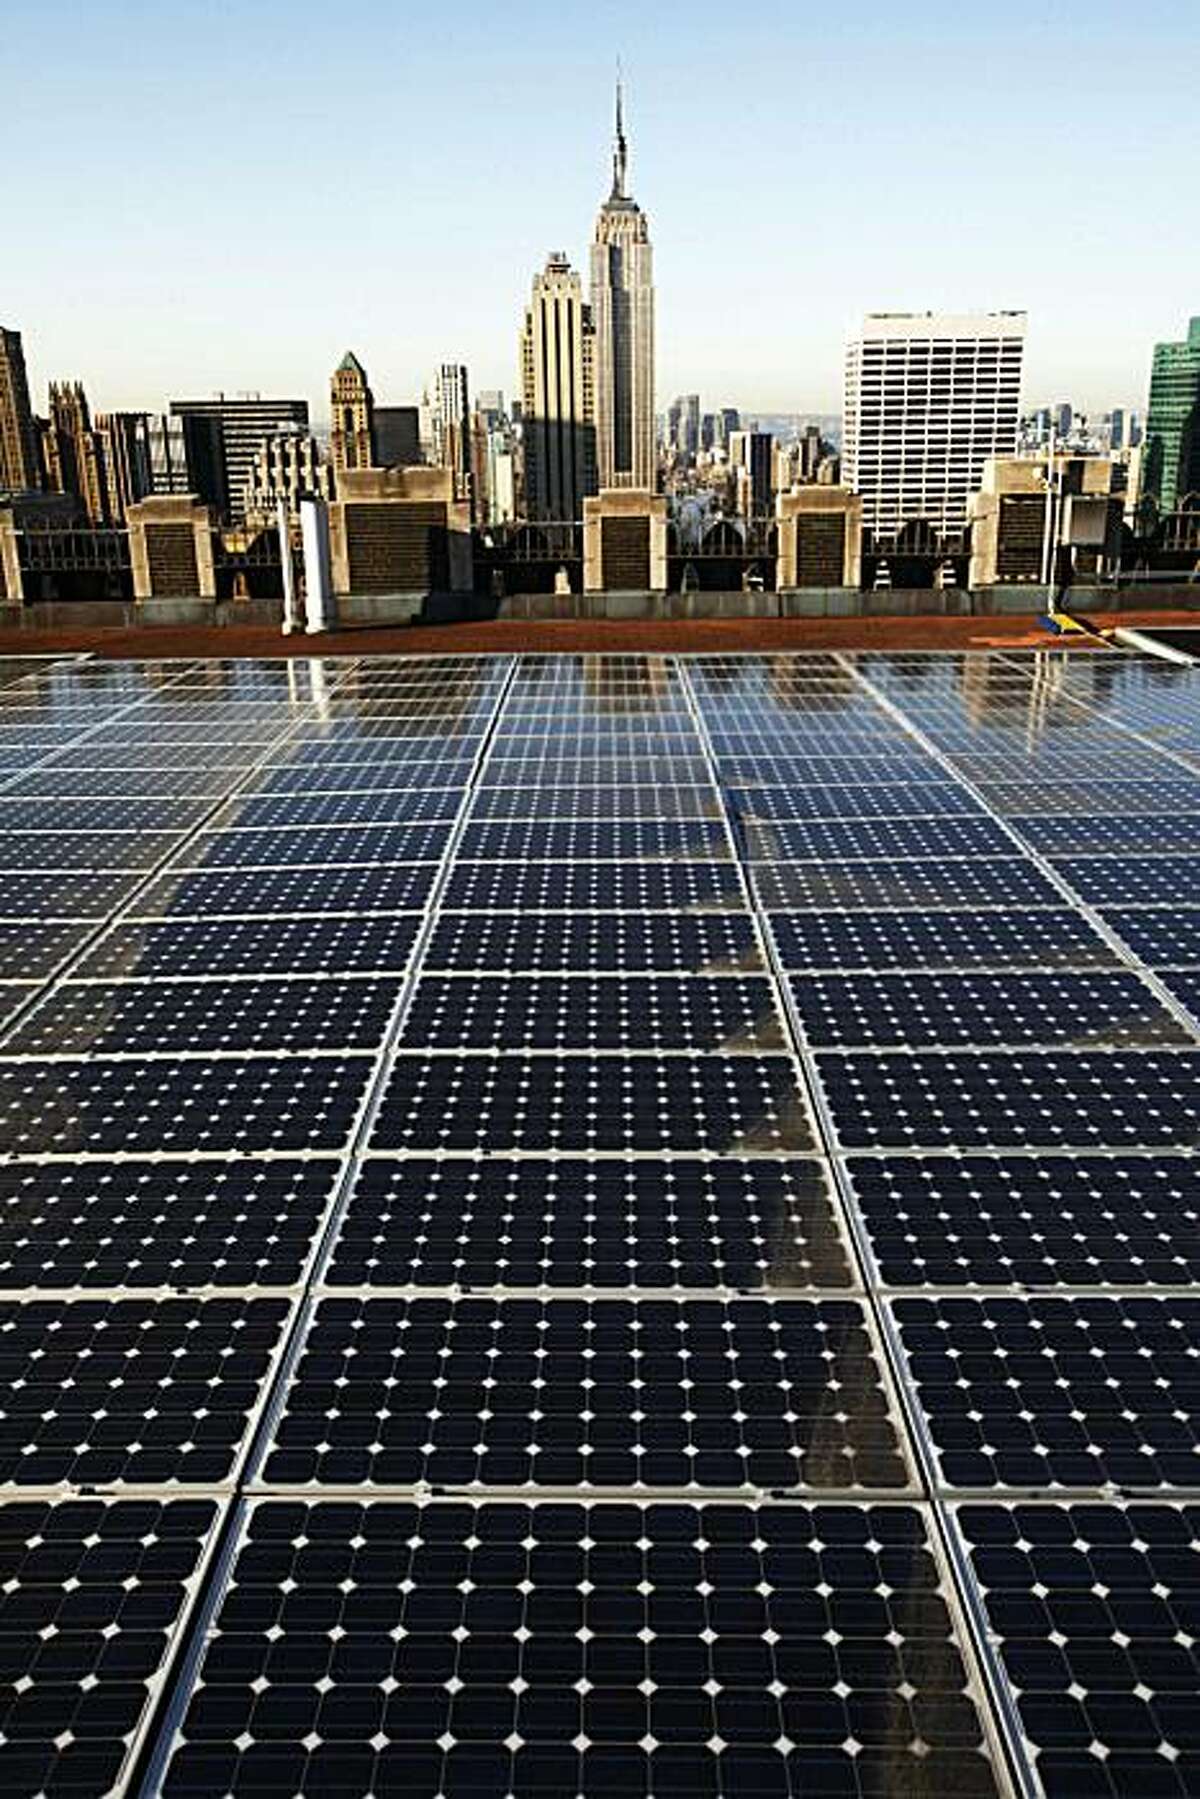 In this March 24, 2009 photo, solar panels are in place on a Rockefeller Center rooftop in midtown Manhattan in New York. The fledgling renewable energy industry has surged over much of the past decade, adding jobs at more than twice the national rate, according to a Pew Charitable Trusts study released Wednesday, June 10, 2009.(AP Photo/Mark Lennihan)